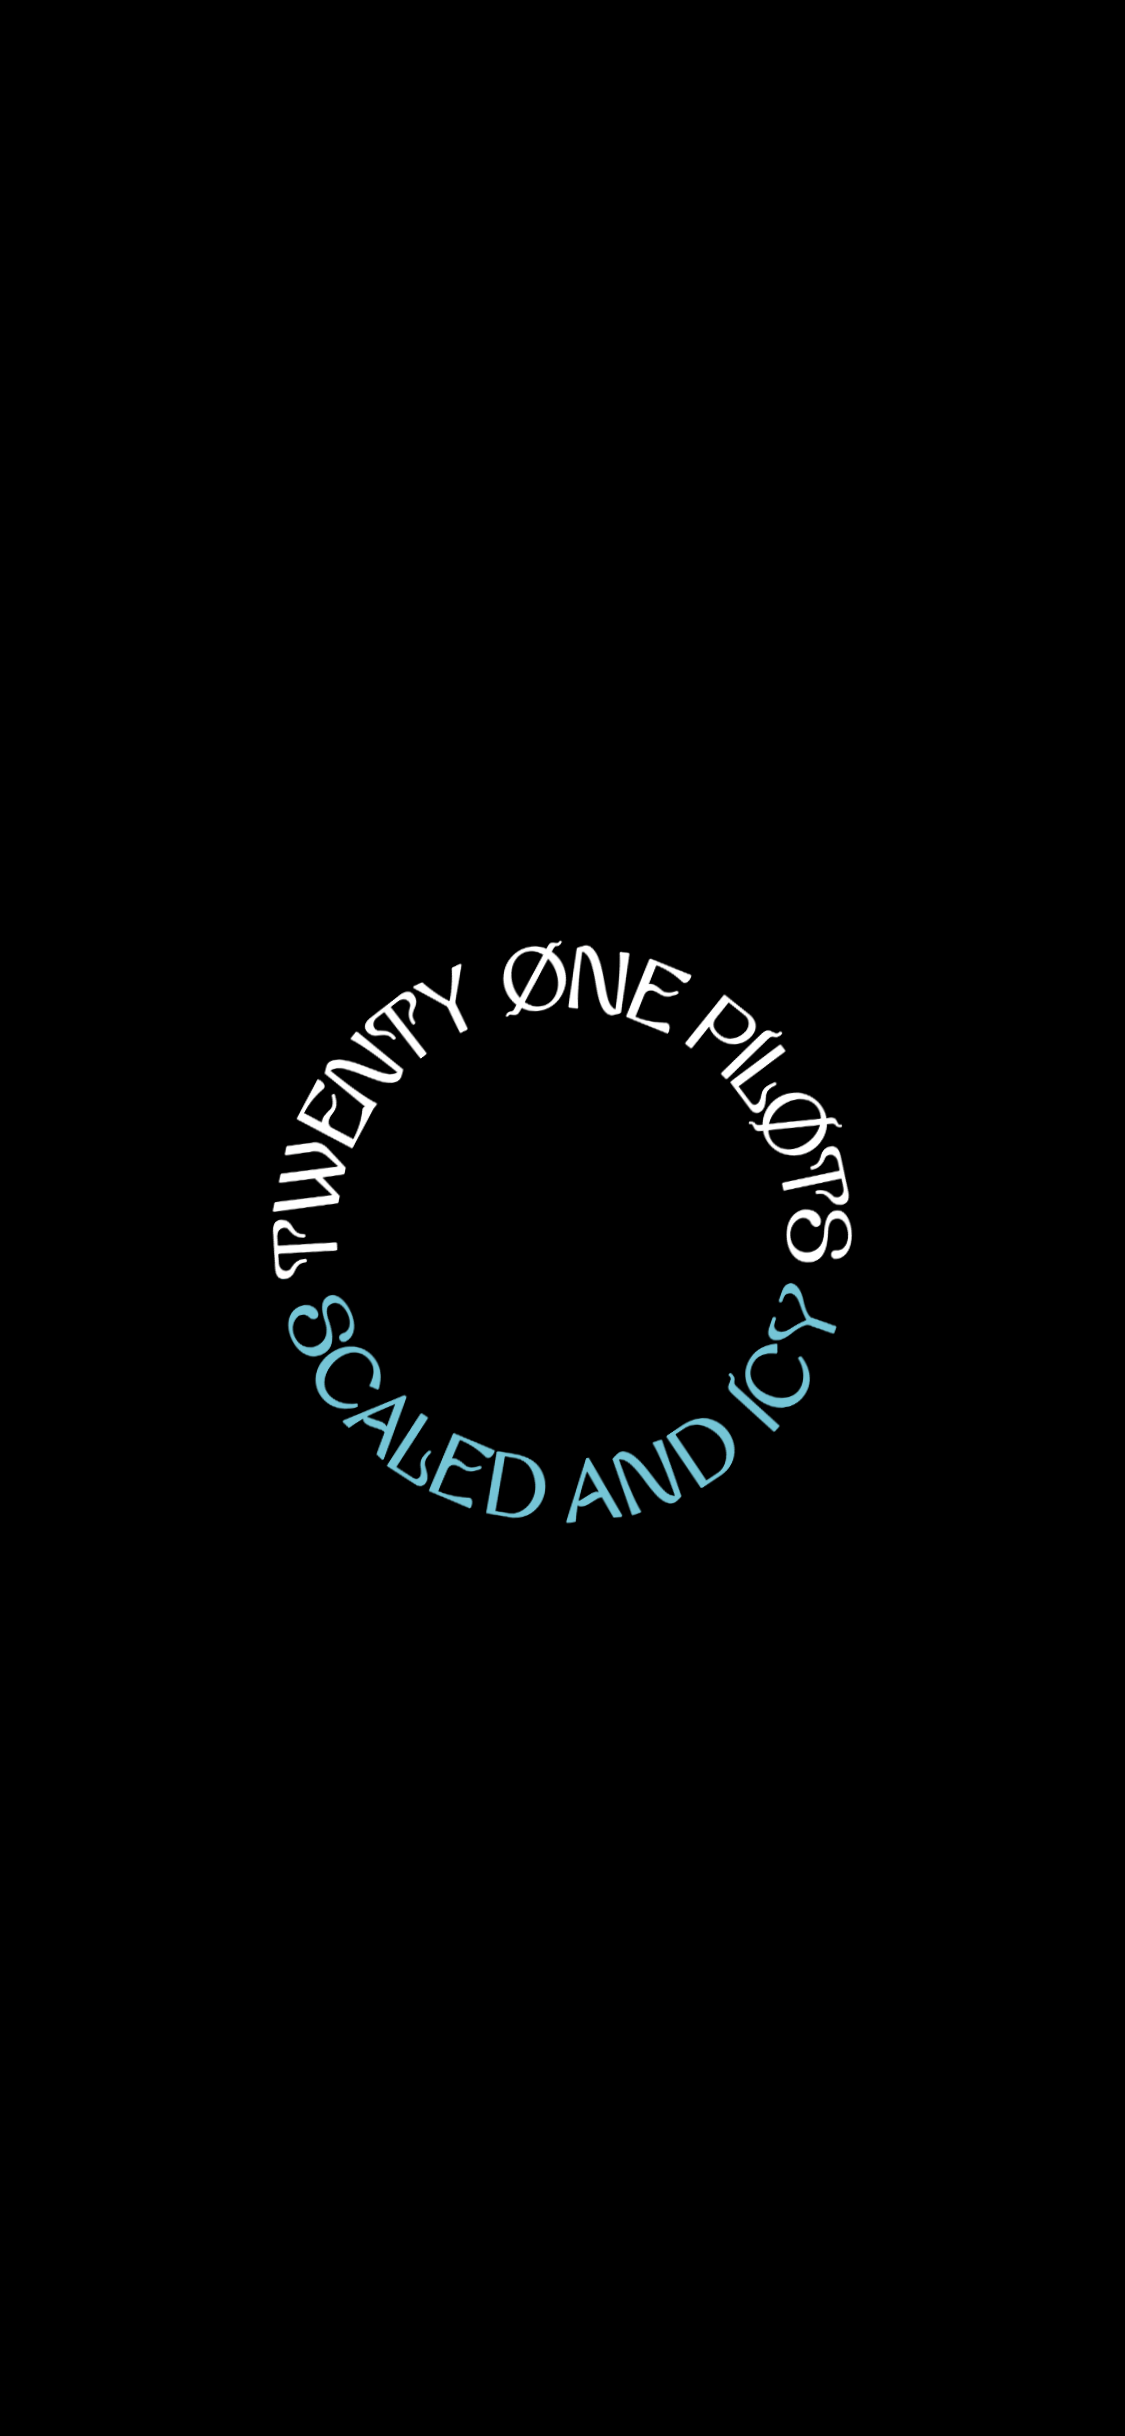 A black and white image of the word unity one focus - Capricorn